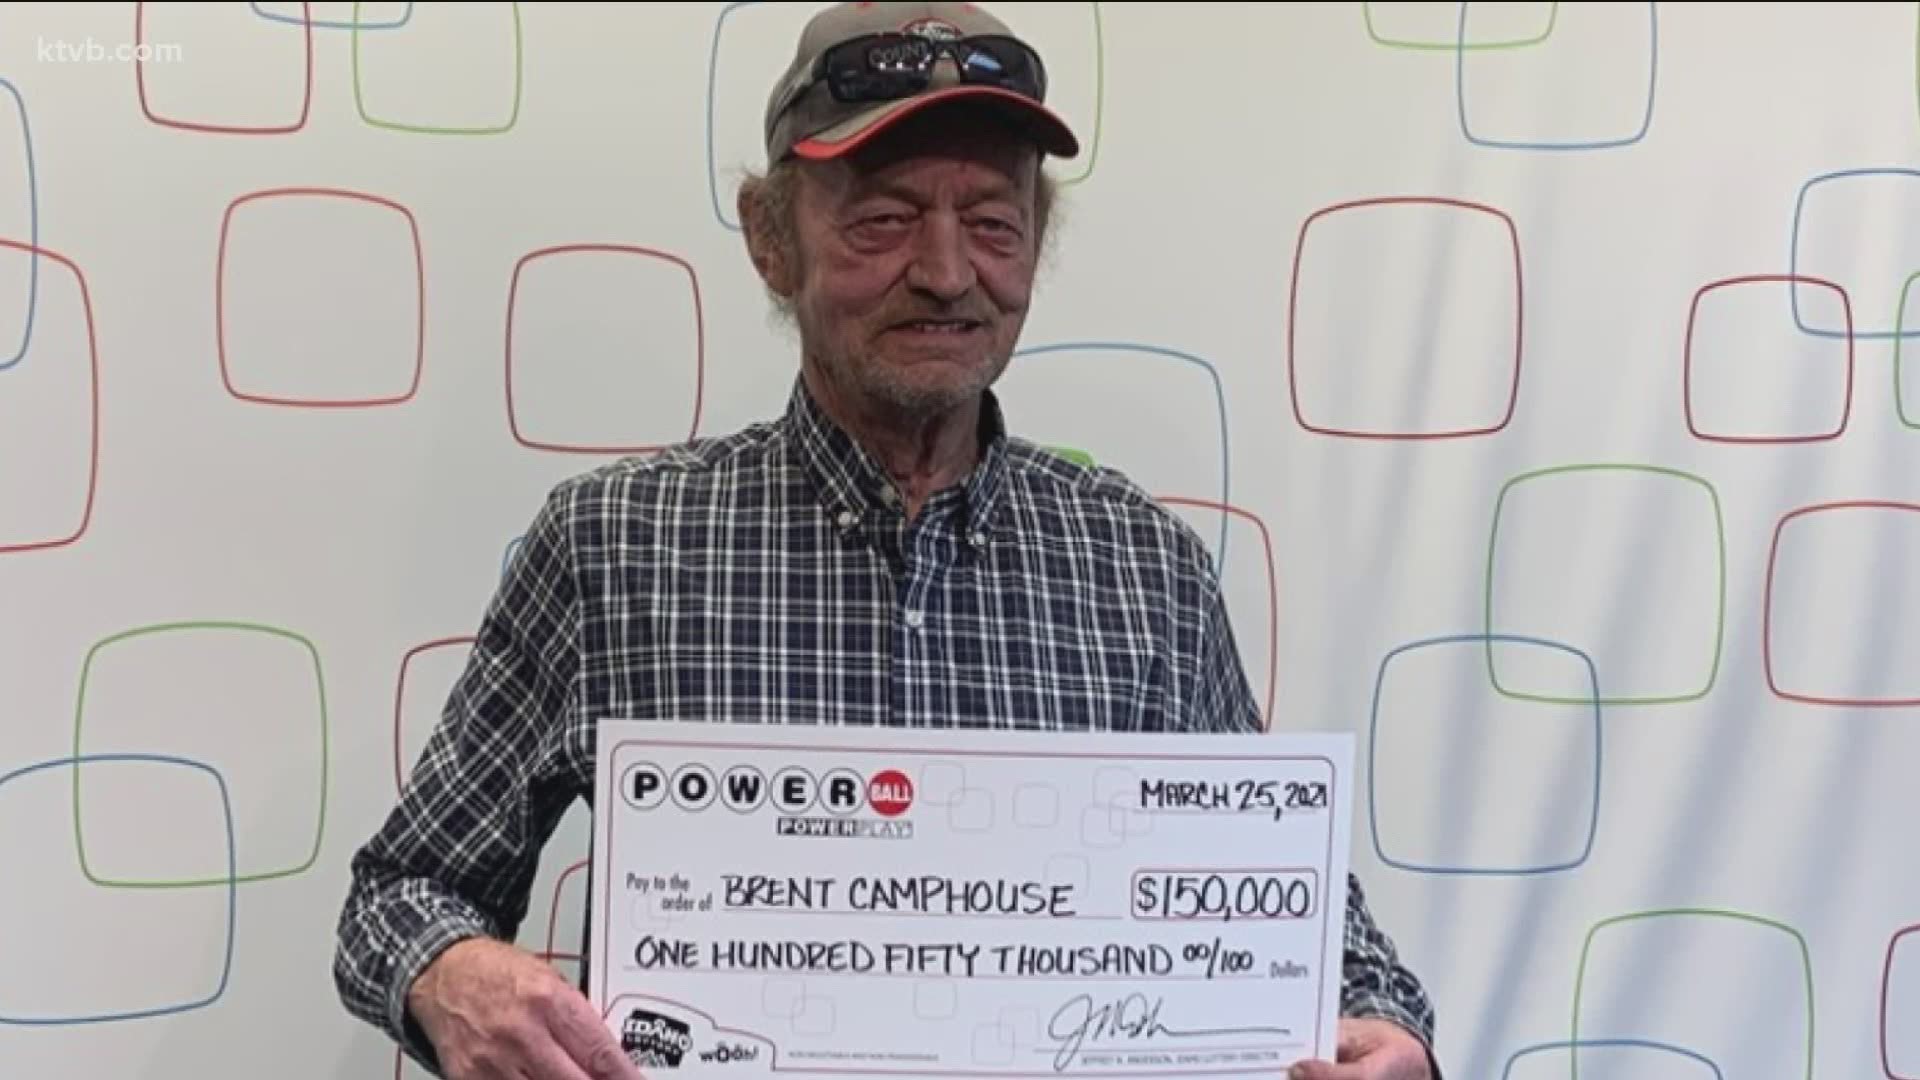 Brent Camphouse of Rexburg won $150,000 because his ticket had the PowerPlay feature, which tripled his prize.